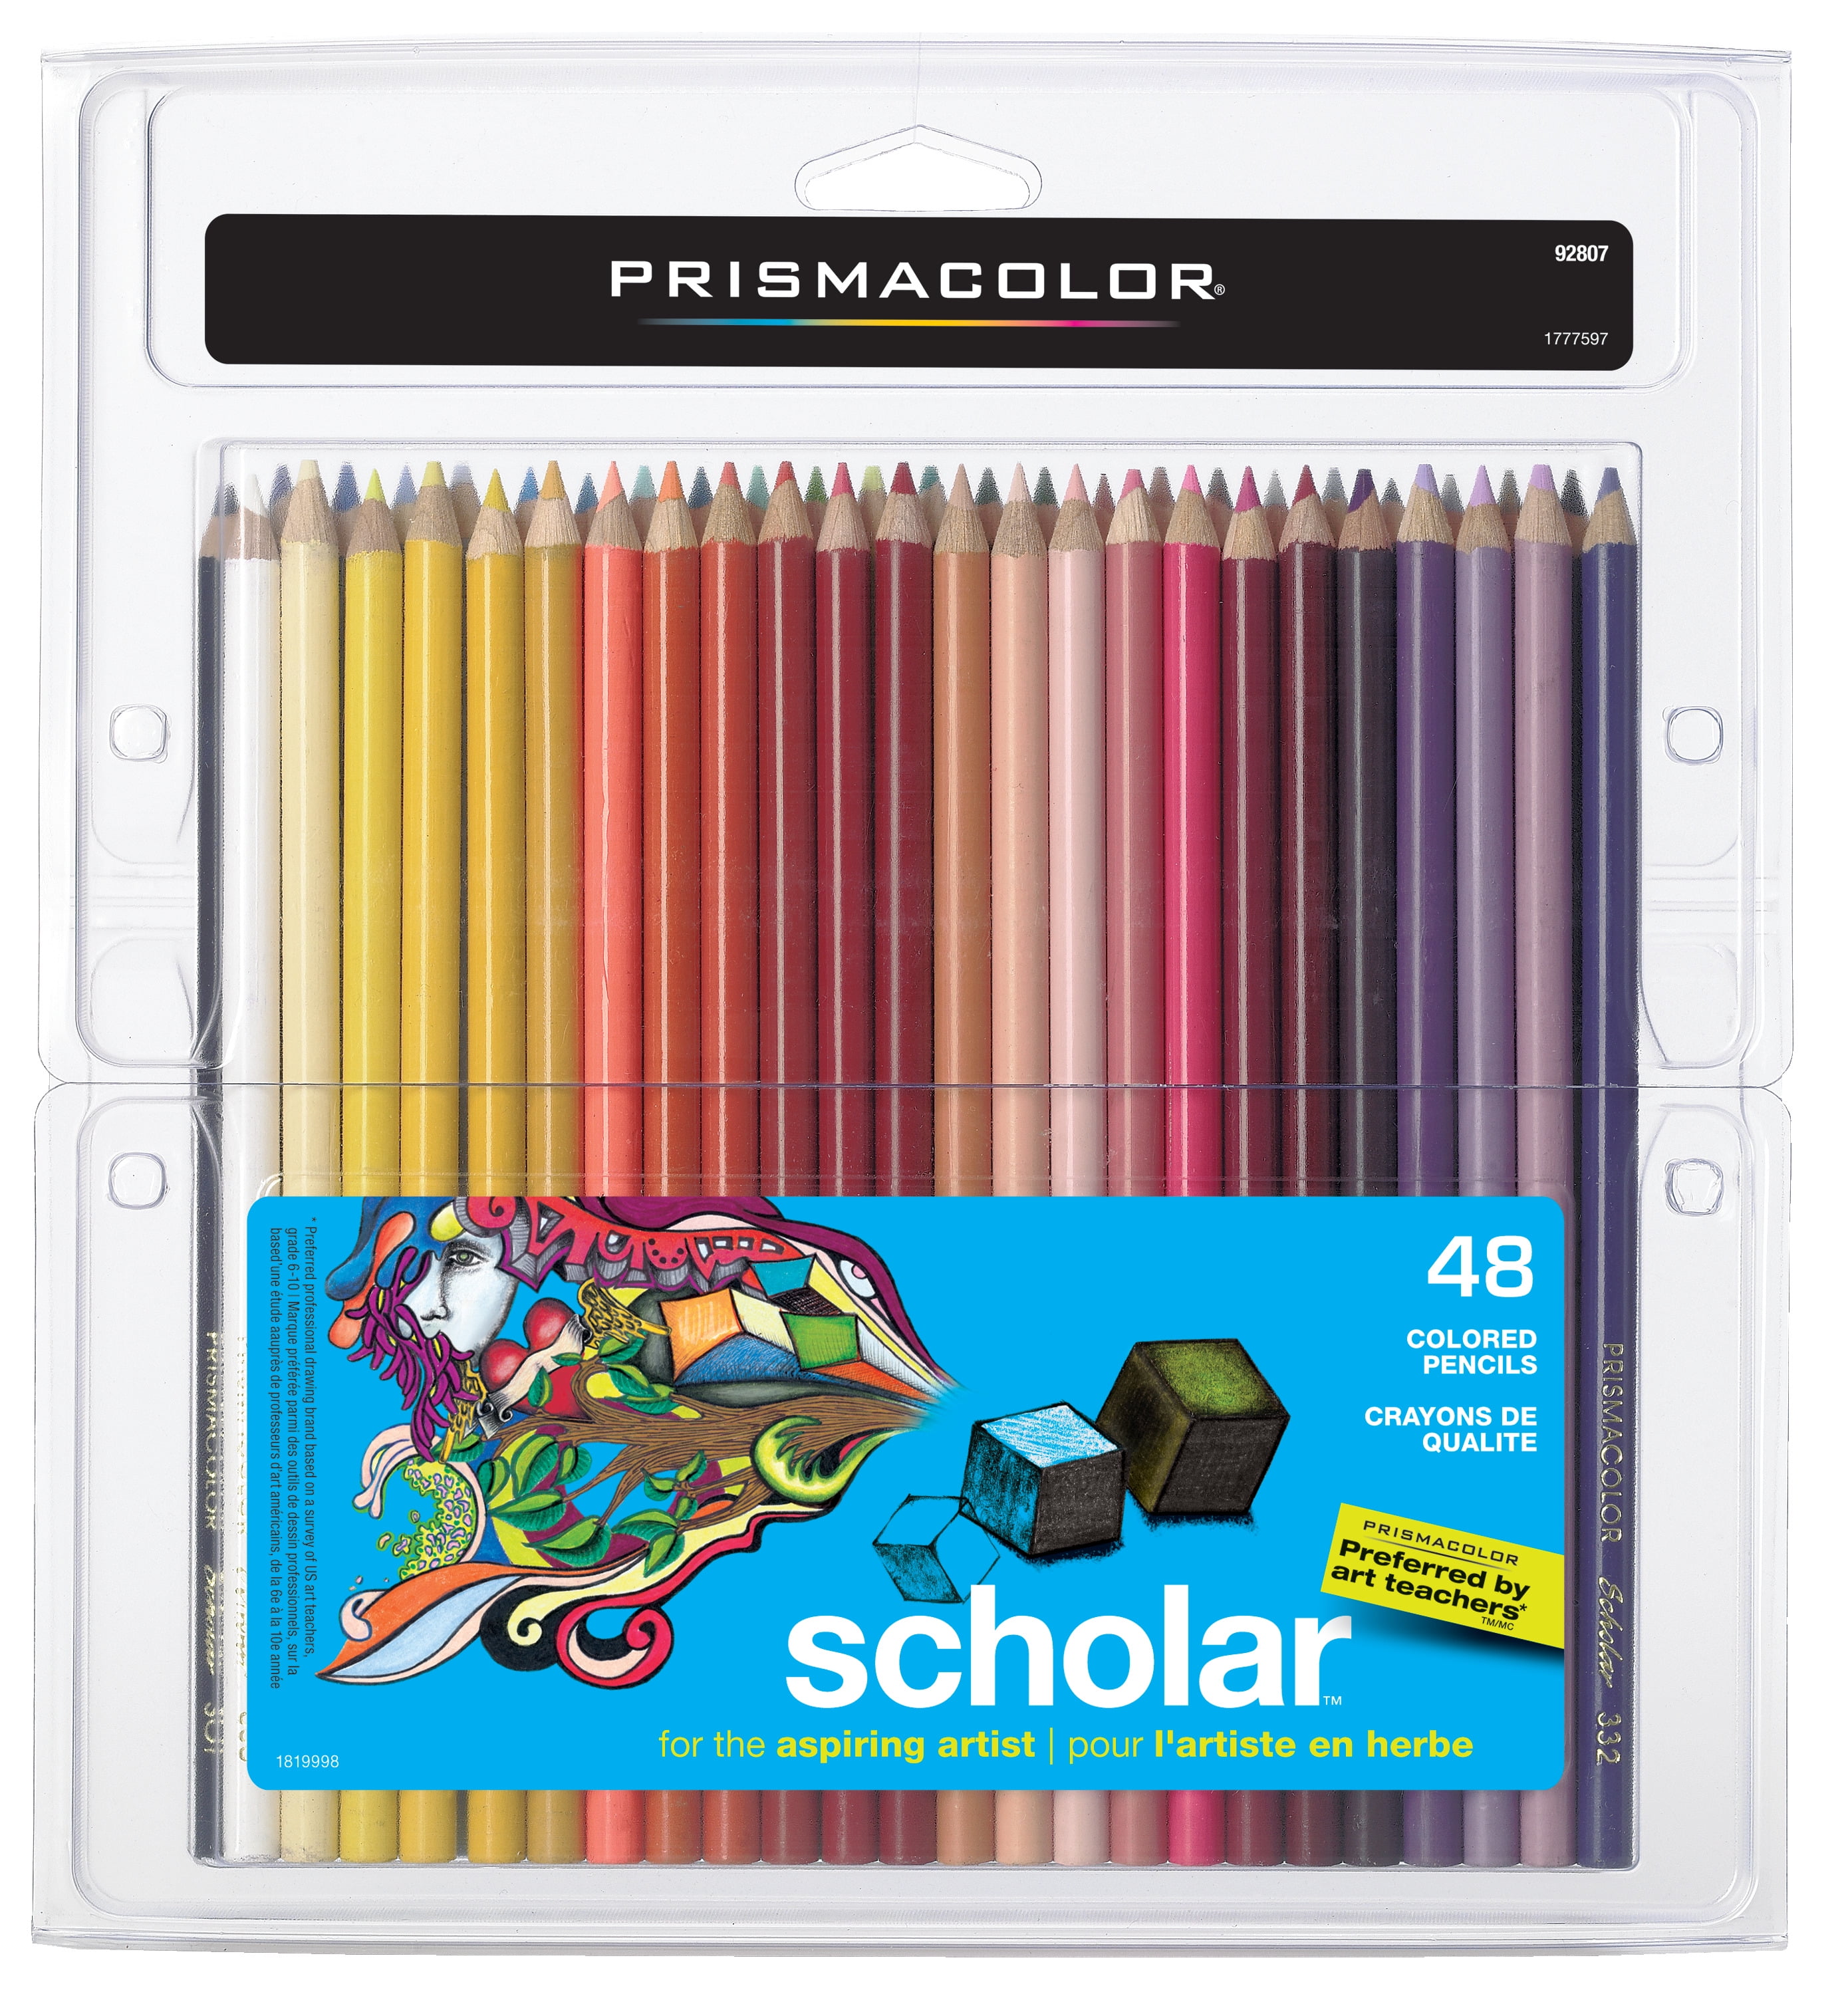 Crayola Blenders and Basics Colored Pencils: What's Inside the Box